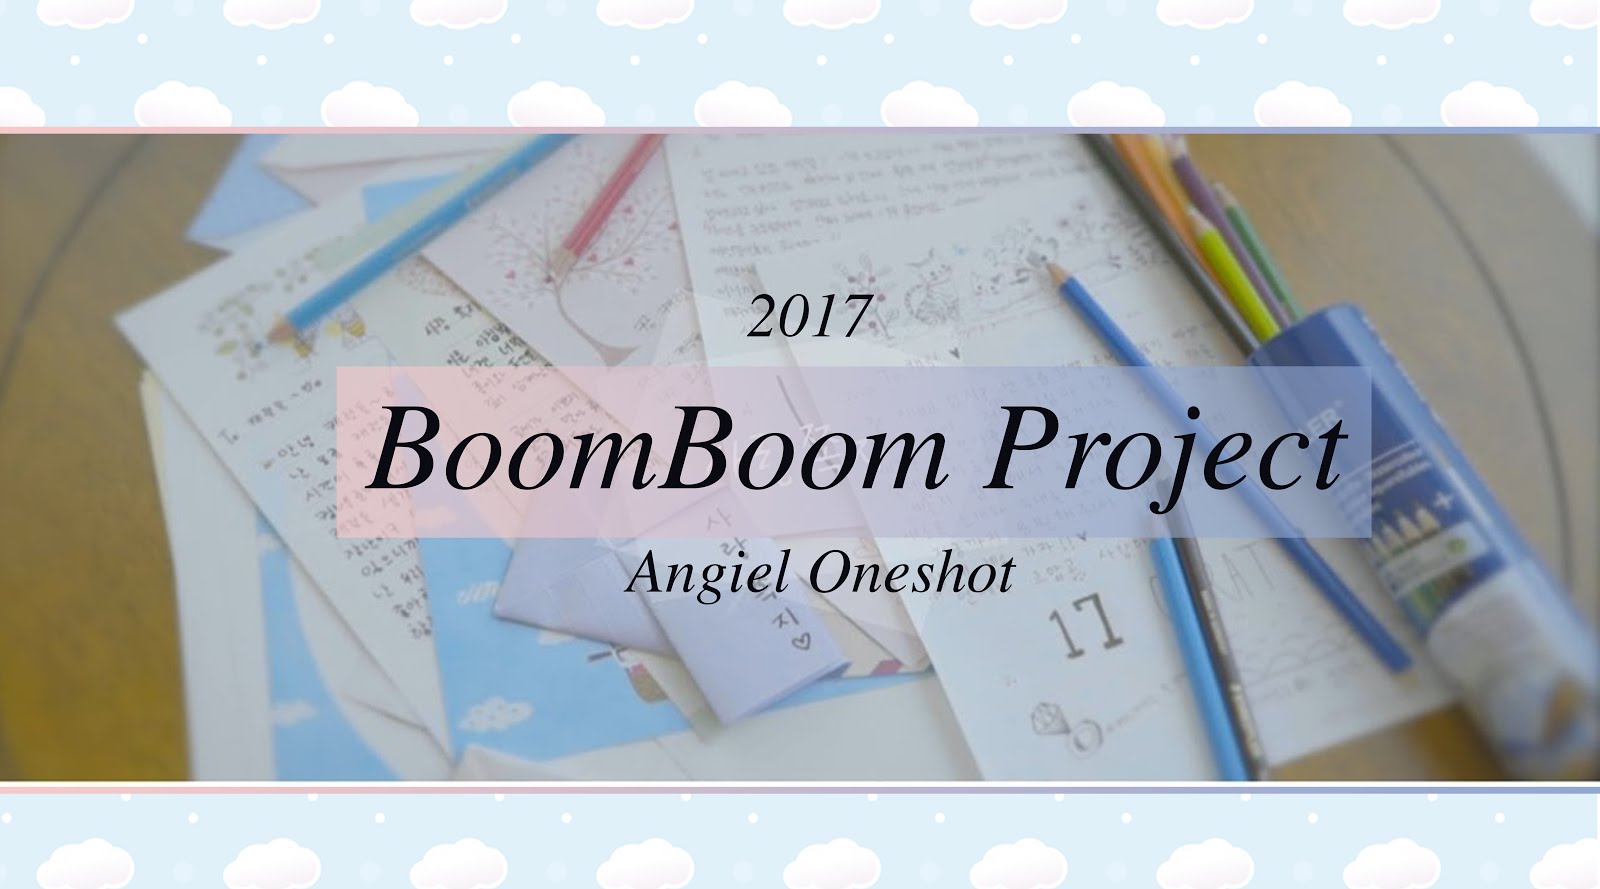 BoomBoomProject